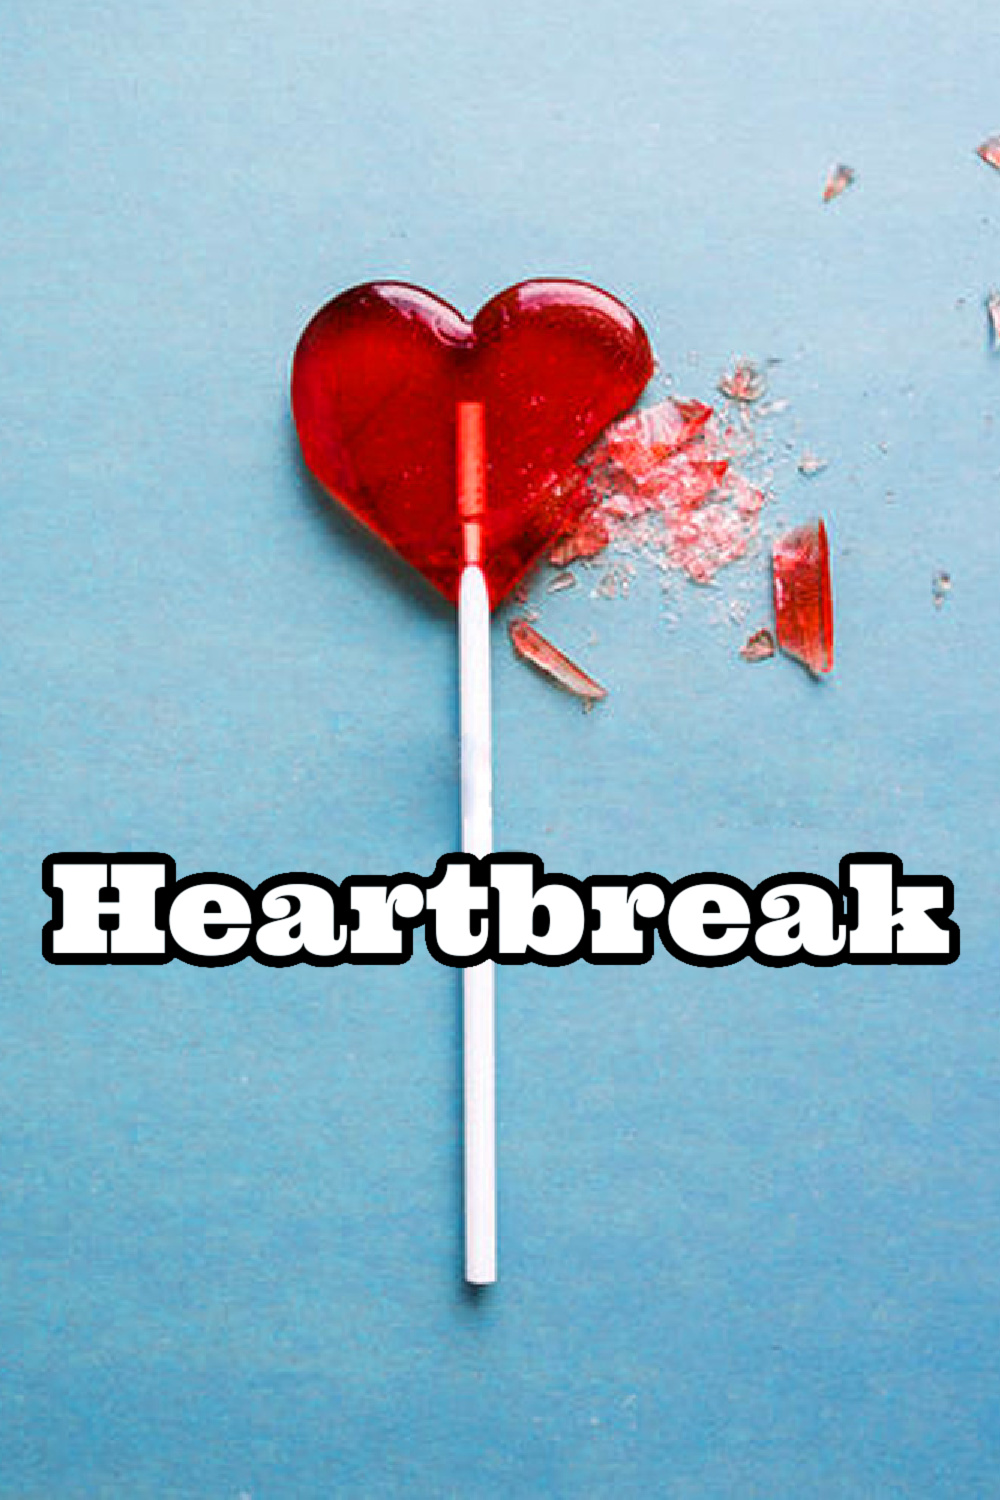 Getting Closure After a Breakup | Do Breakups Hurt Women More than Men? | Friends with an Ex?